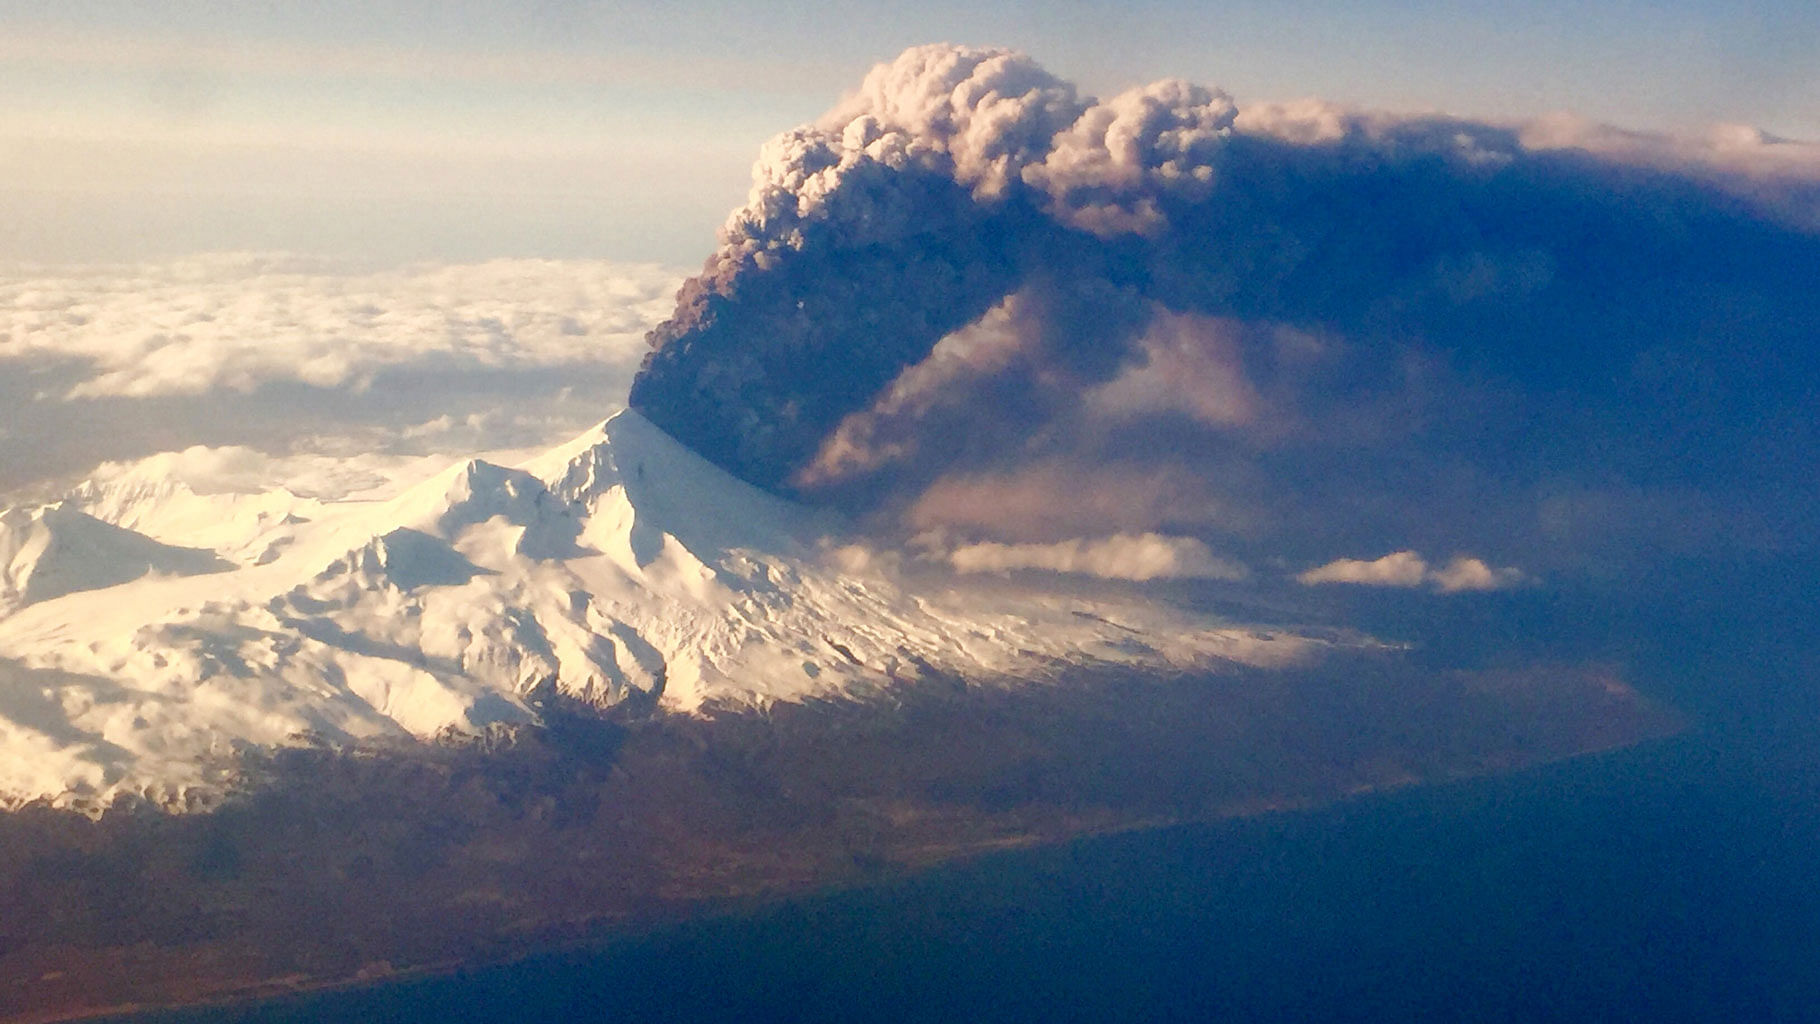 Pavlof Volcano, one of Alaska’s most active volcanoes, erupts, sending a plume of volcanic ash into the air .Pavlof Volcano is 625 miles southwest of Anchorage on the Alaska Peninsula, the finger of land that sticks out from mainland Alaska toward the Aleutian Islands. (Photo:AP)